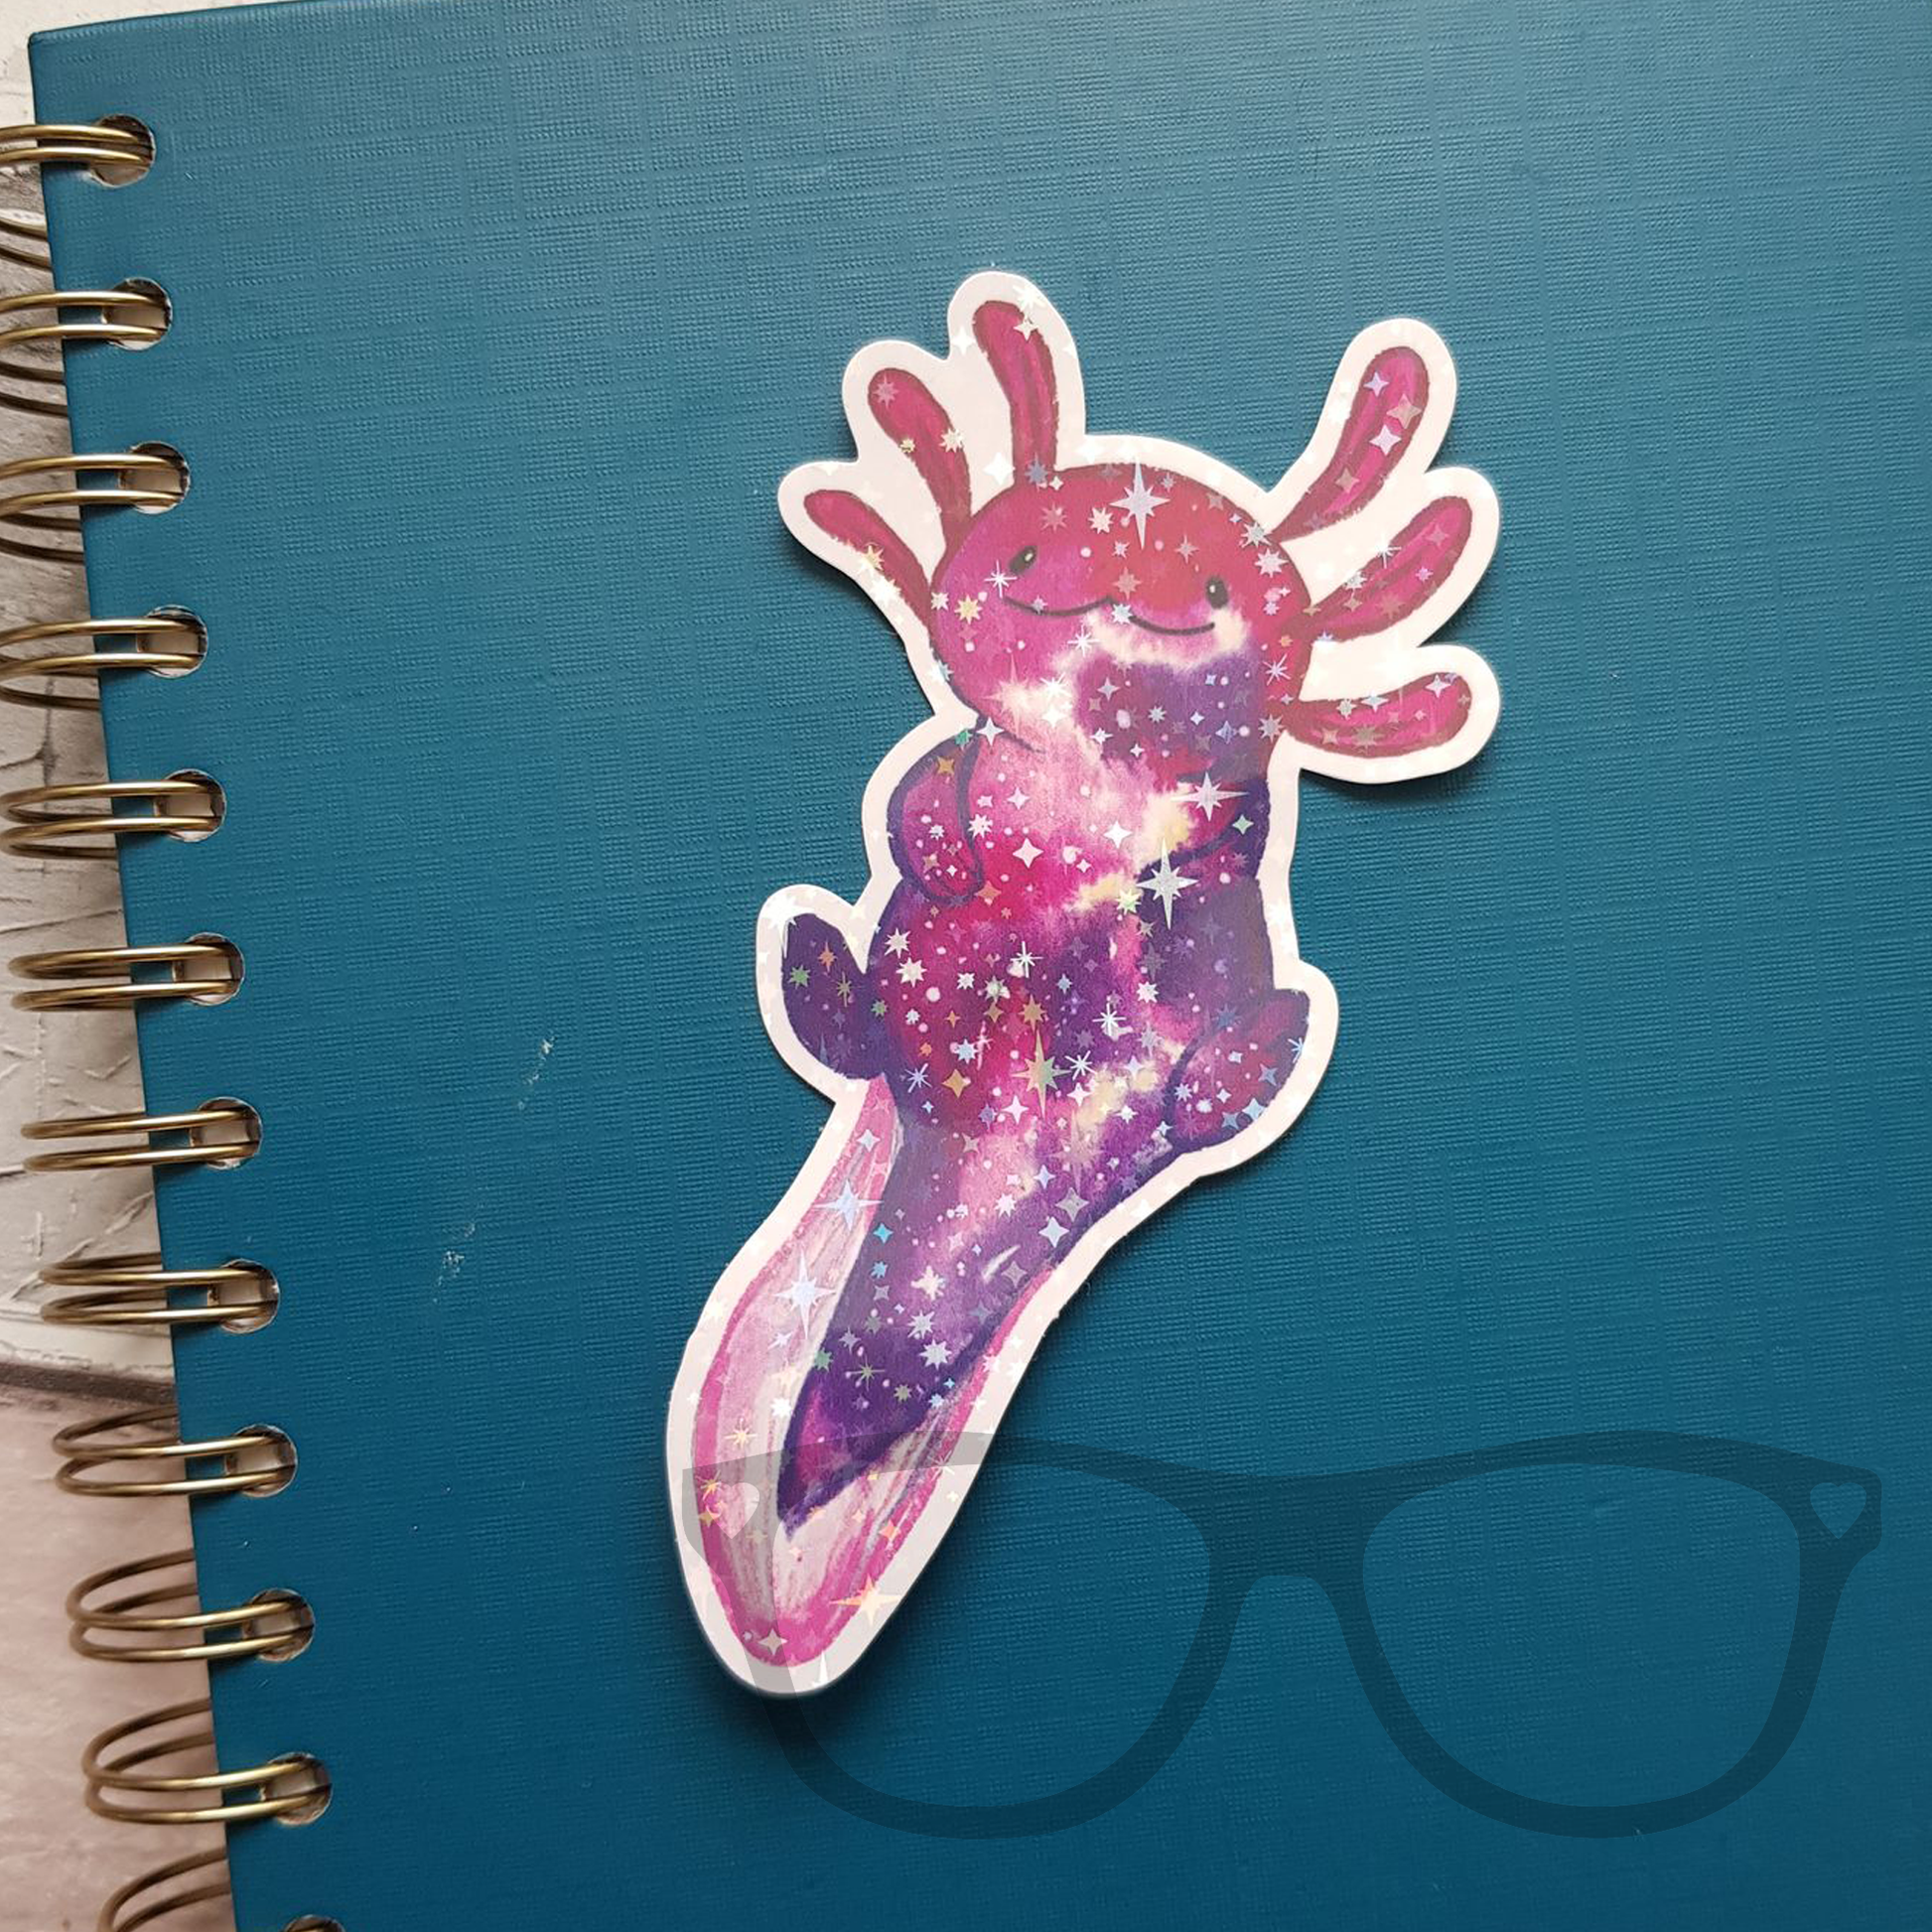 Axolotl space sticker with star sparkles on notebook